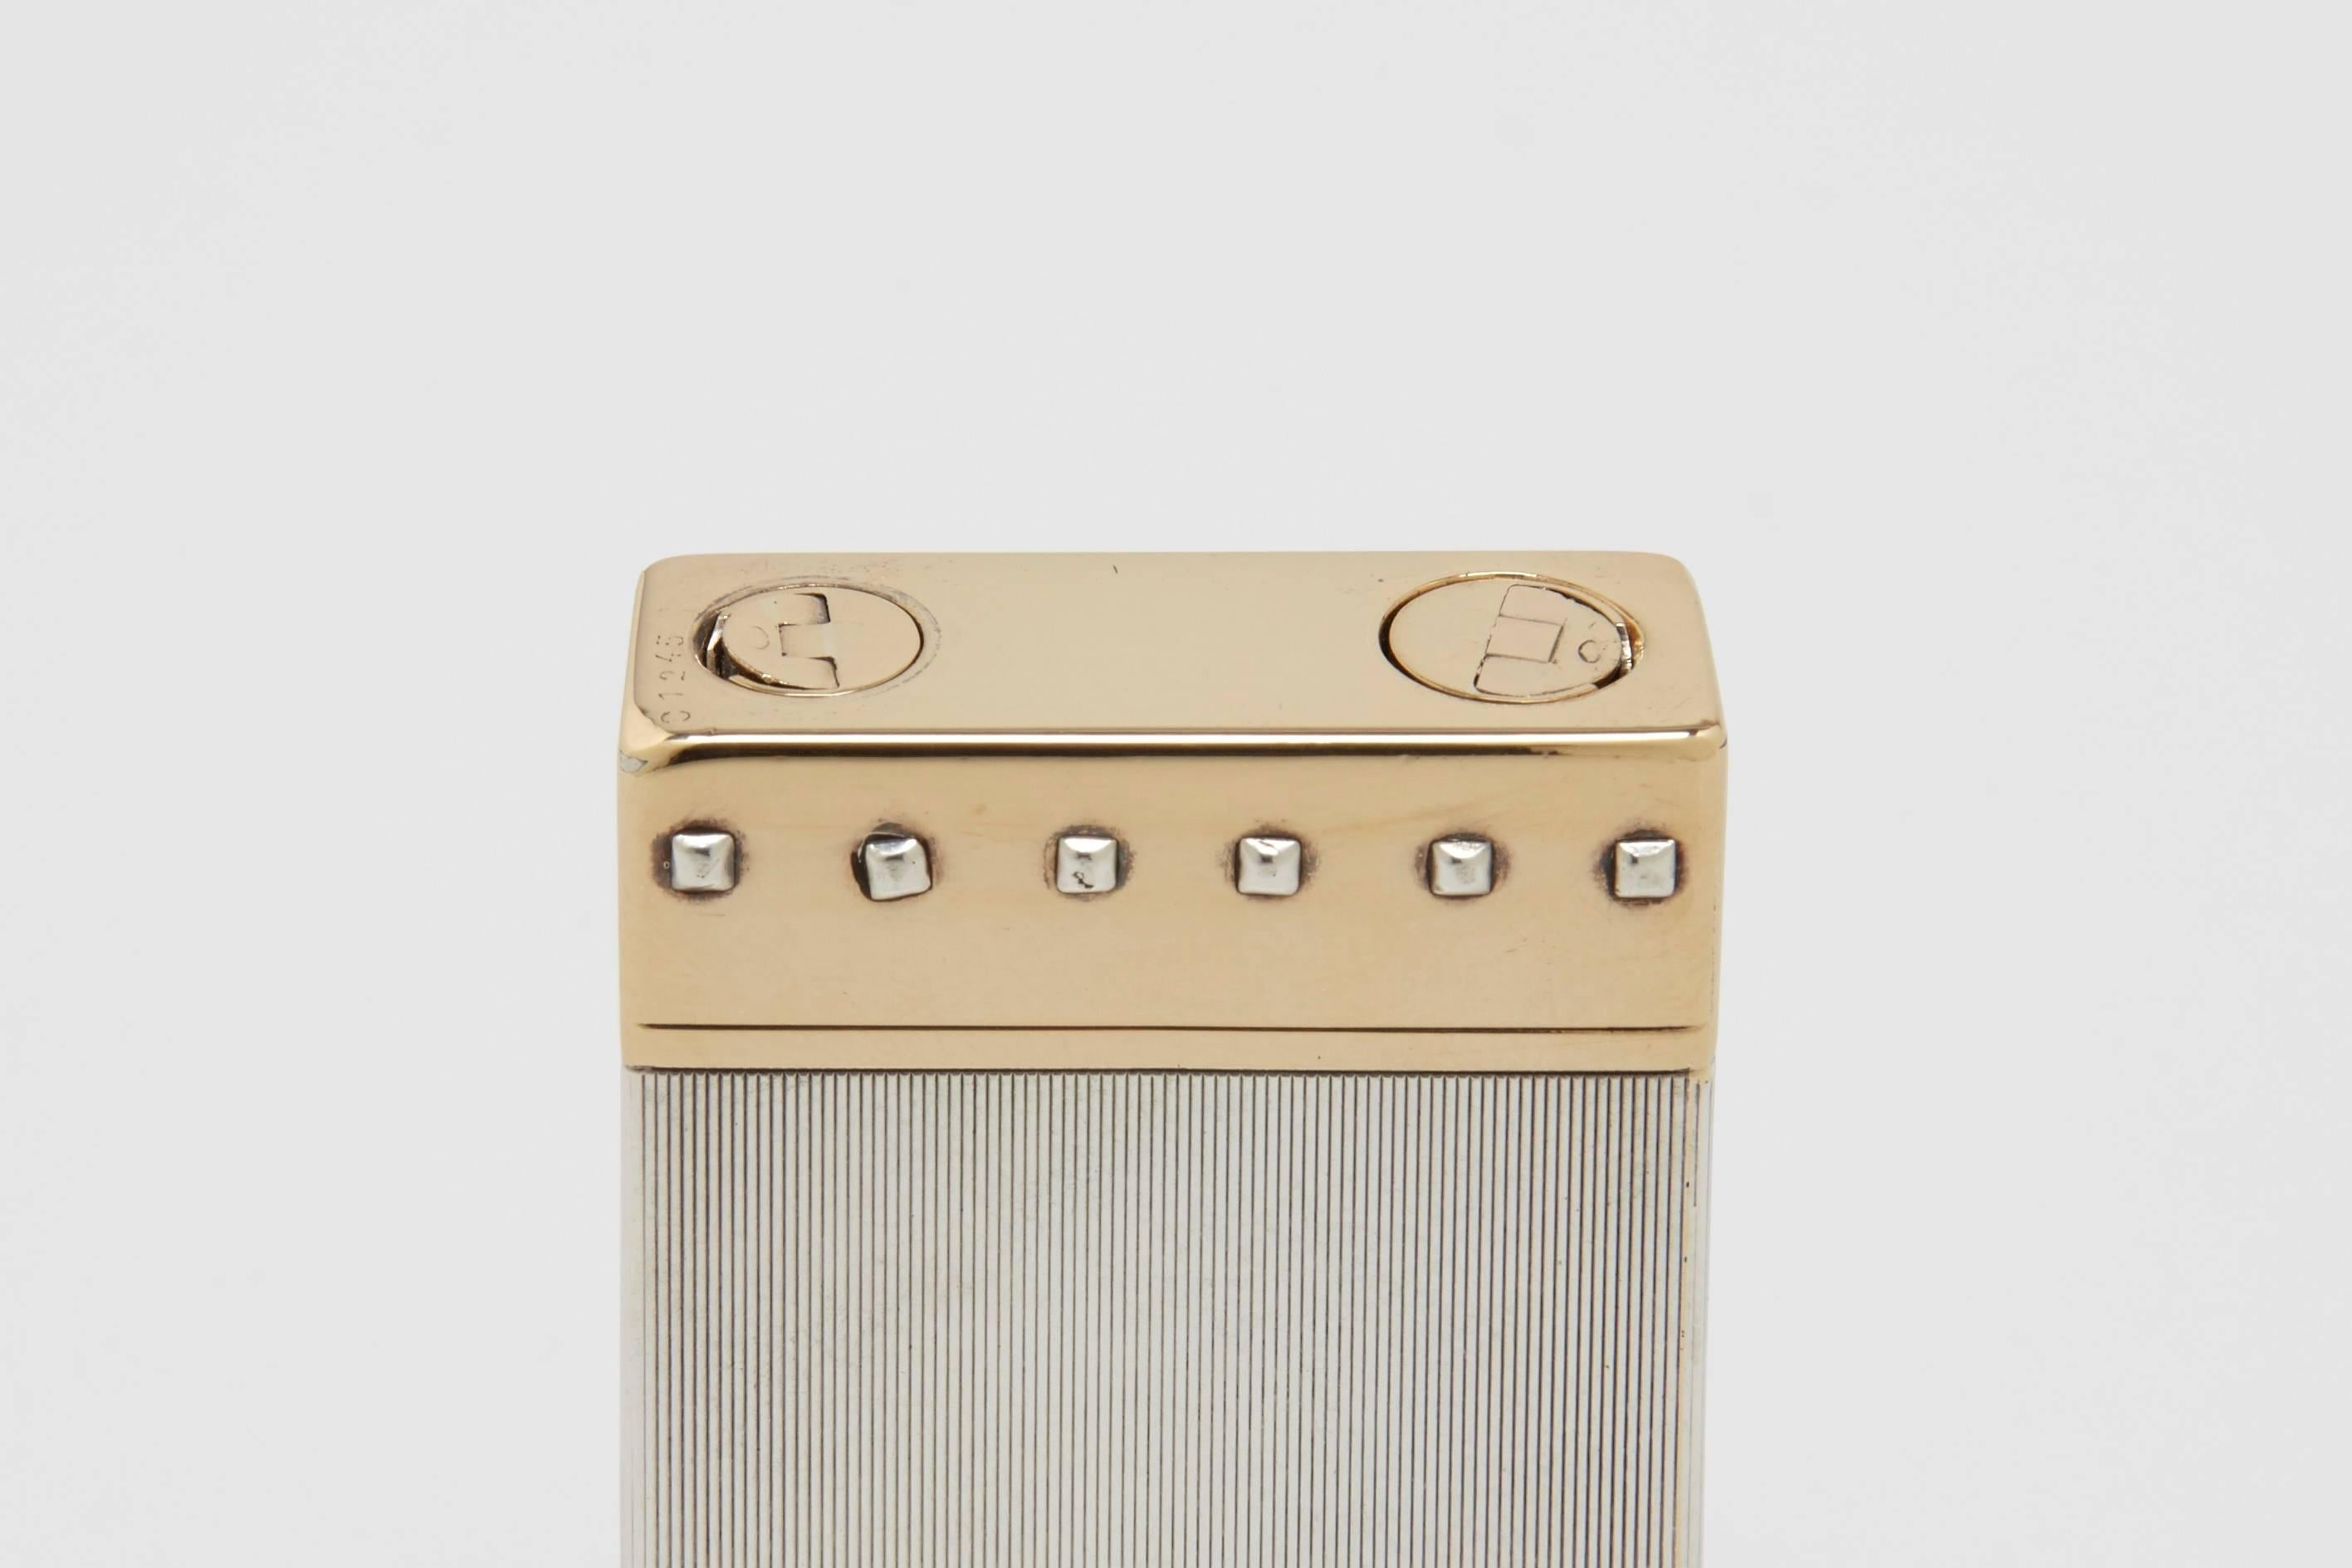 A very rare Art Deco sterling silver and solid 18-carat gold petrol wick lighter. This is a unique prototype or special order lighter from Cartier, as was sometimes the case during this period where wealthy and famous clients would work with the